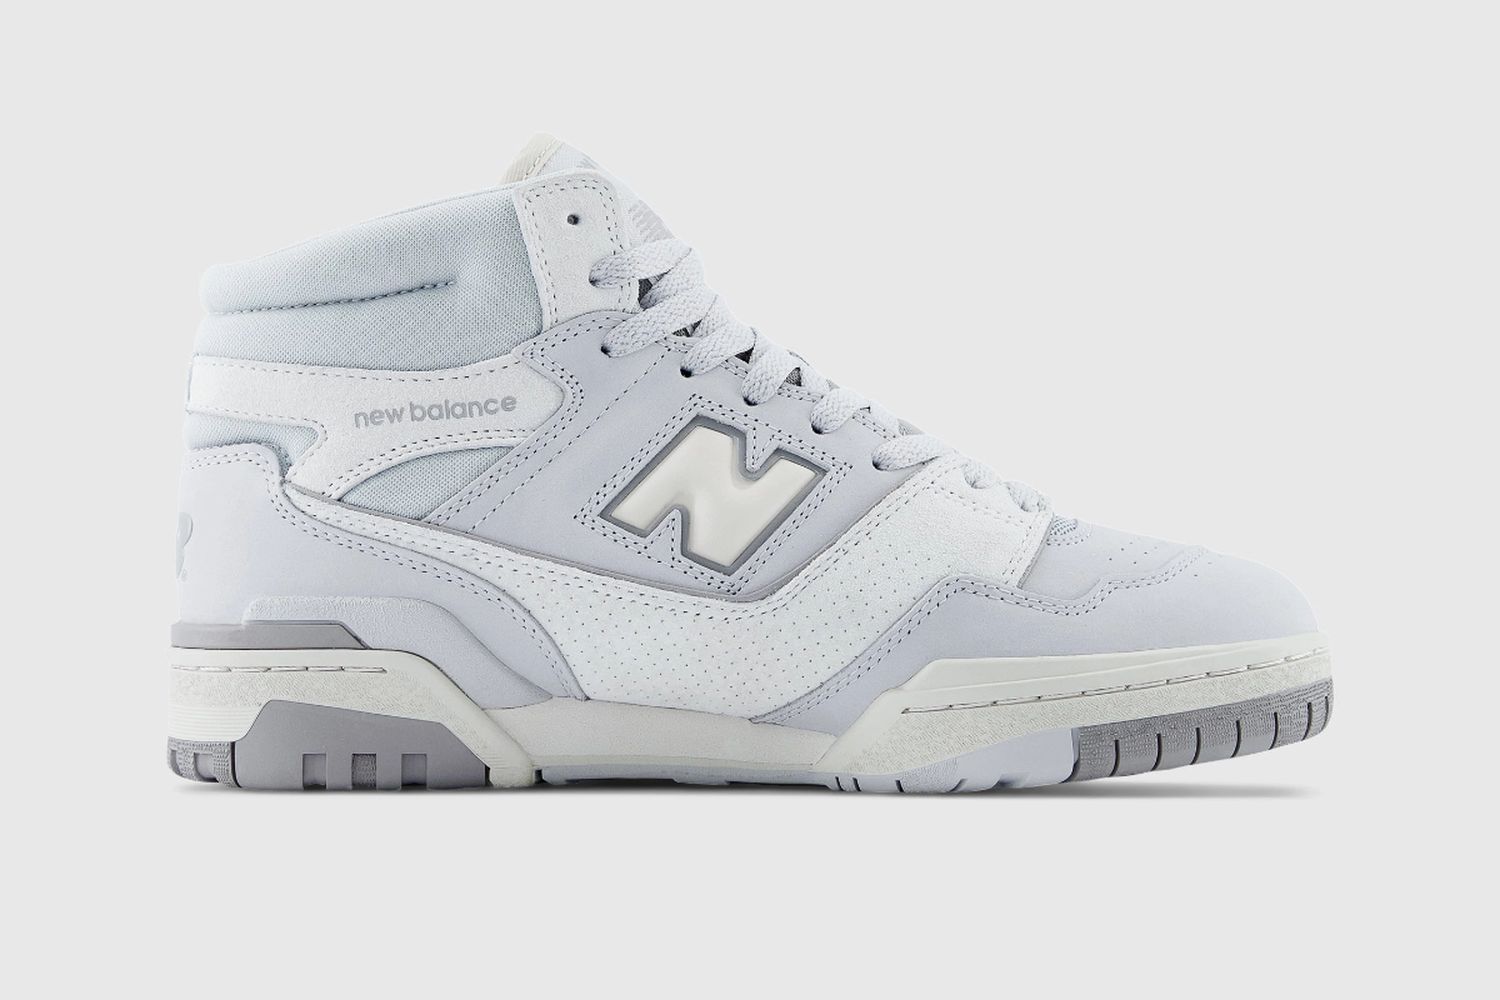 17 Classic Sneakers That Should Be in Any Collection